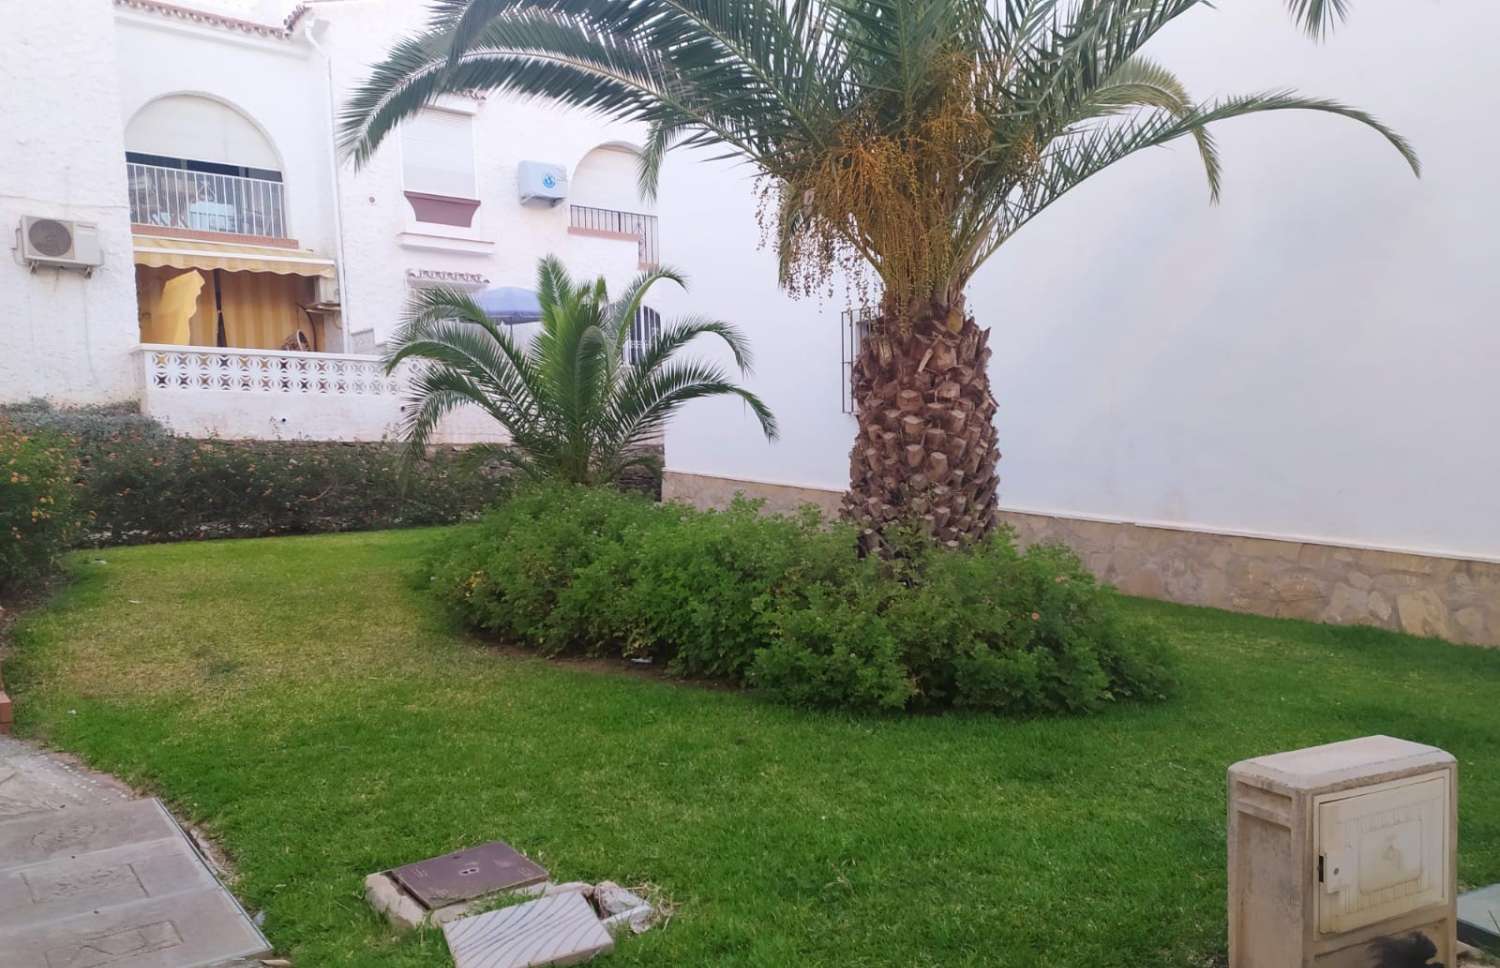 Apartment for holidays in Torrox Costa